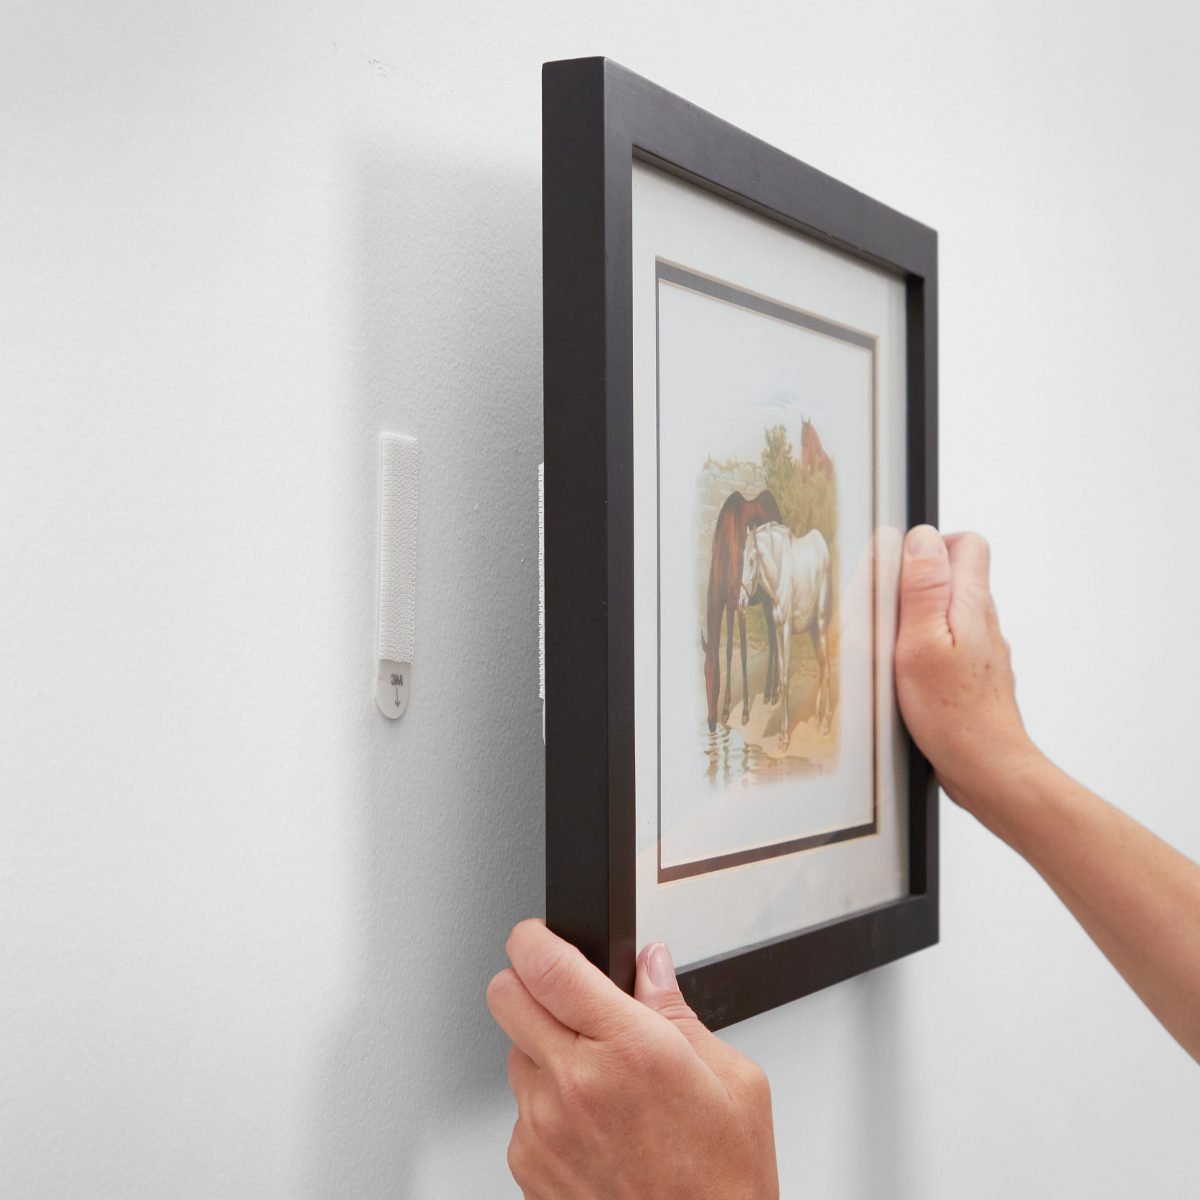 How to Hang Art Without Nails So You Don't Damage Your Walls